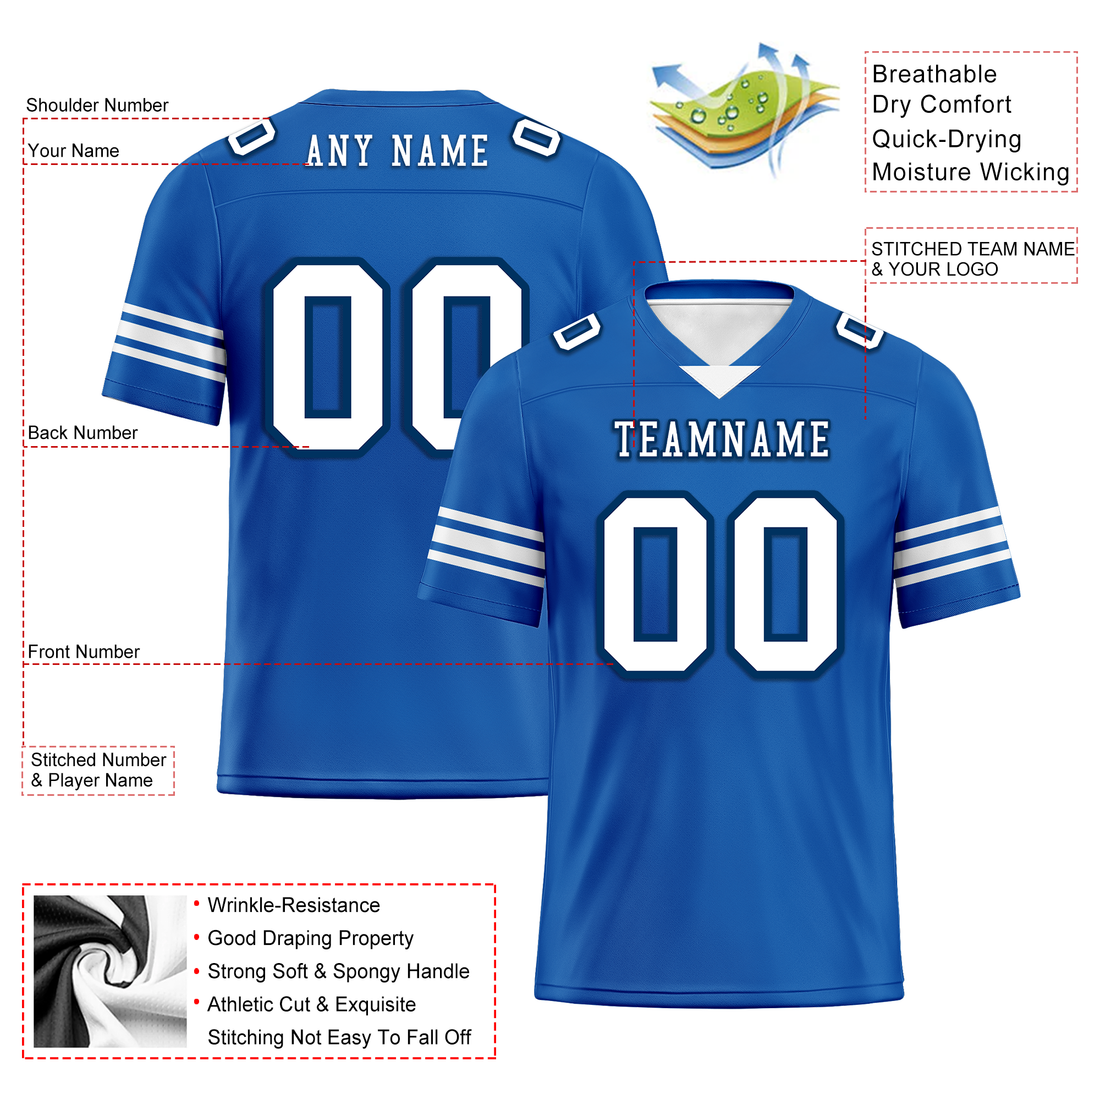 Custom Blue Classic Style Personalized Authentic Football Jersey FBJ02-bd0a700f